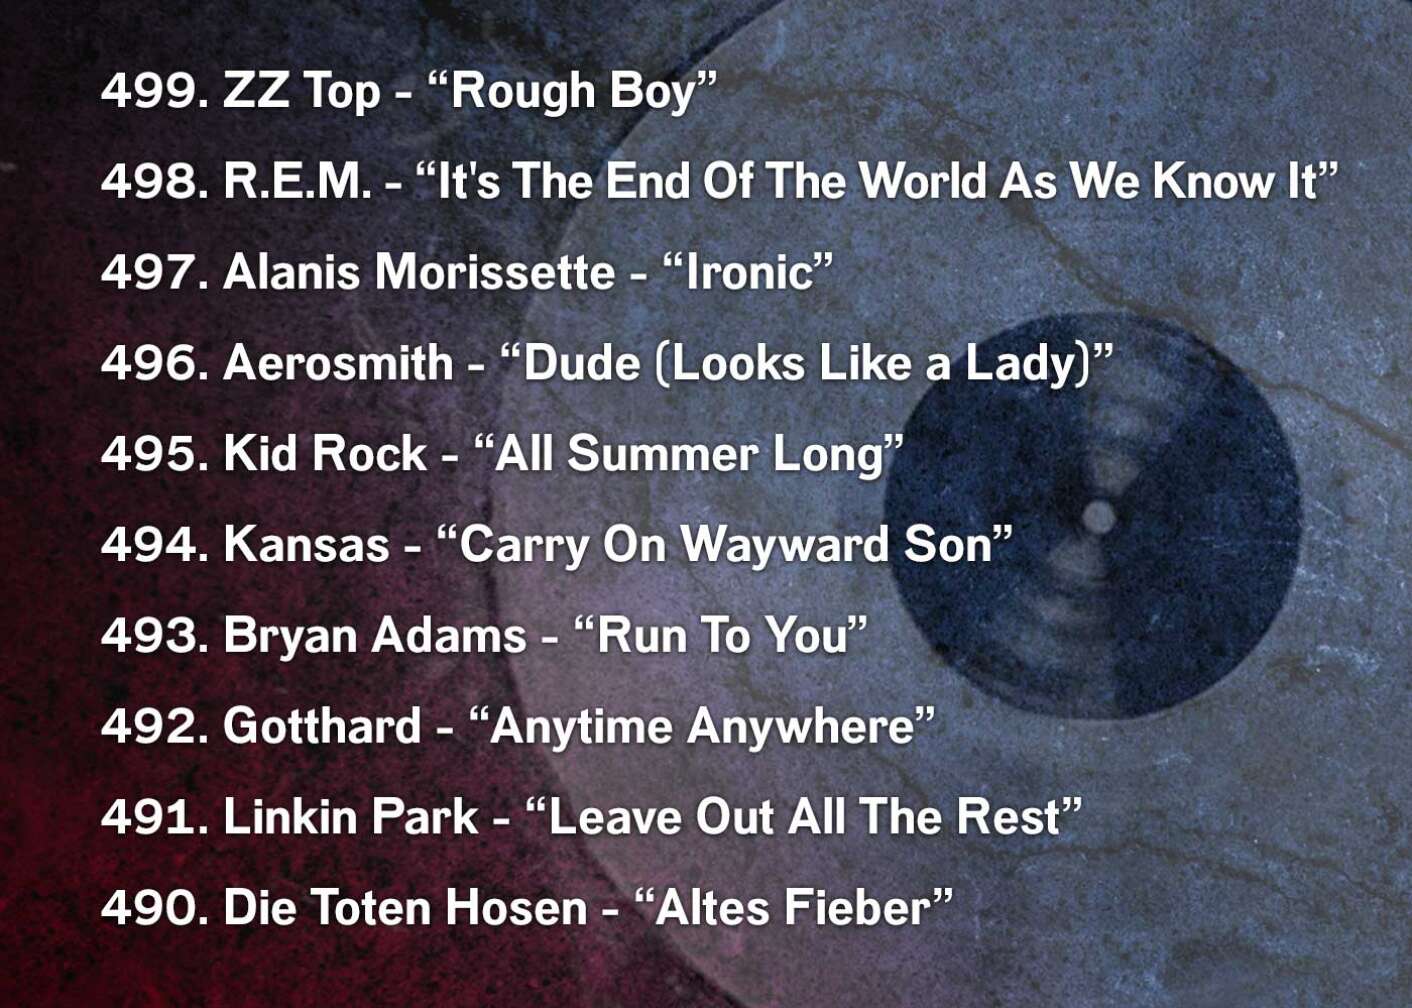 499. ZZ Top - “Rough Boy” 498. R.E.M. - “It's The End Of The World As We Know It” 497. Alanis Morissette - “Ironic” 496. Aerosmith - “Dude (Looks Like a Lady)” 495. Kid Rock - “All Summer Long” 494. Kansas - “Carry On Wayward Son” 493. Bryan Adams - “Run To You” 492. Gotthard - “Anytime Anywhere” 491. Linkin Park - “Leave Out All The Rest” 490. Die Toten Hosen - “Altes Fieber”